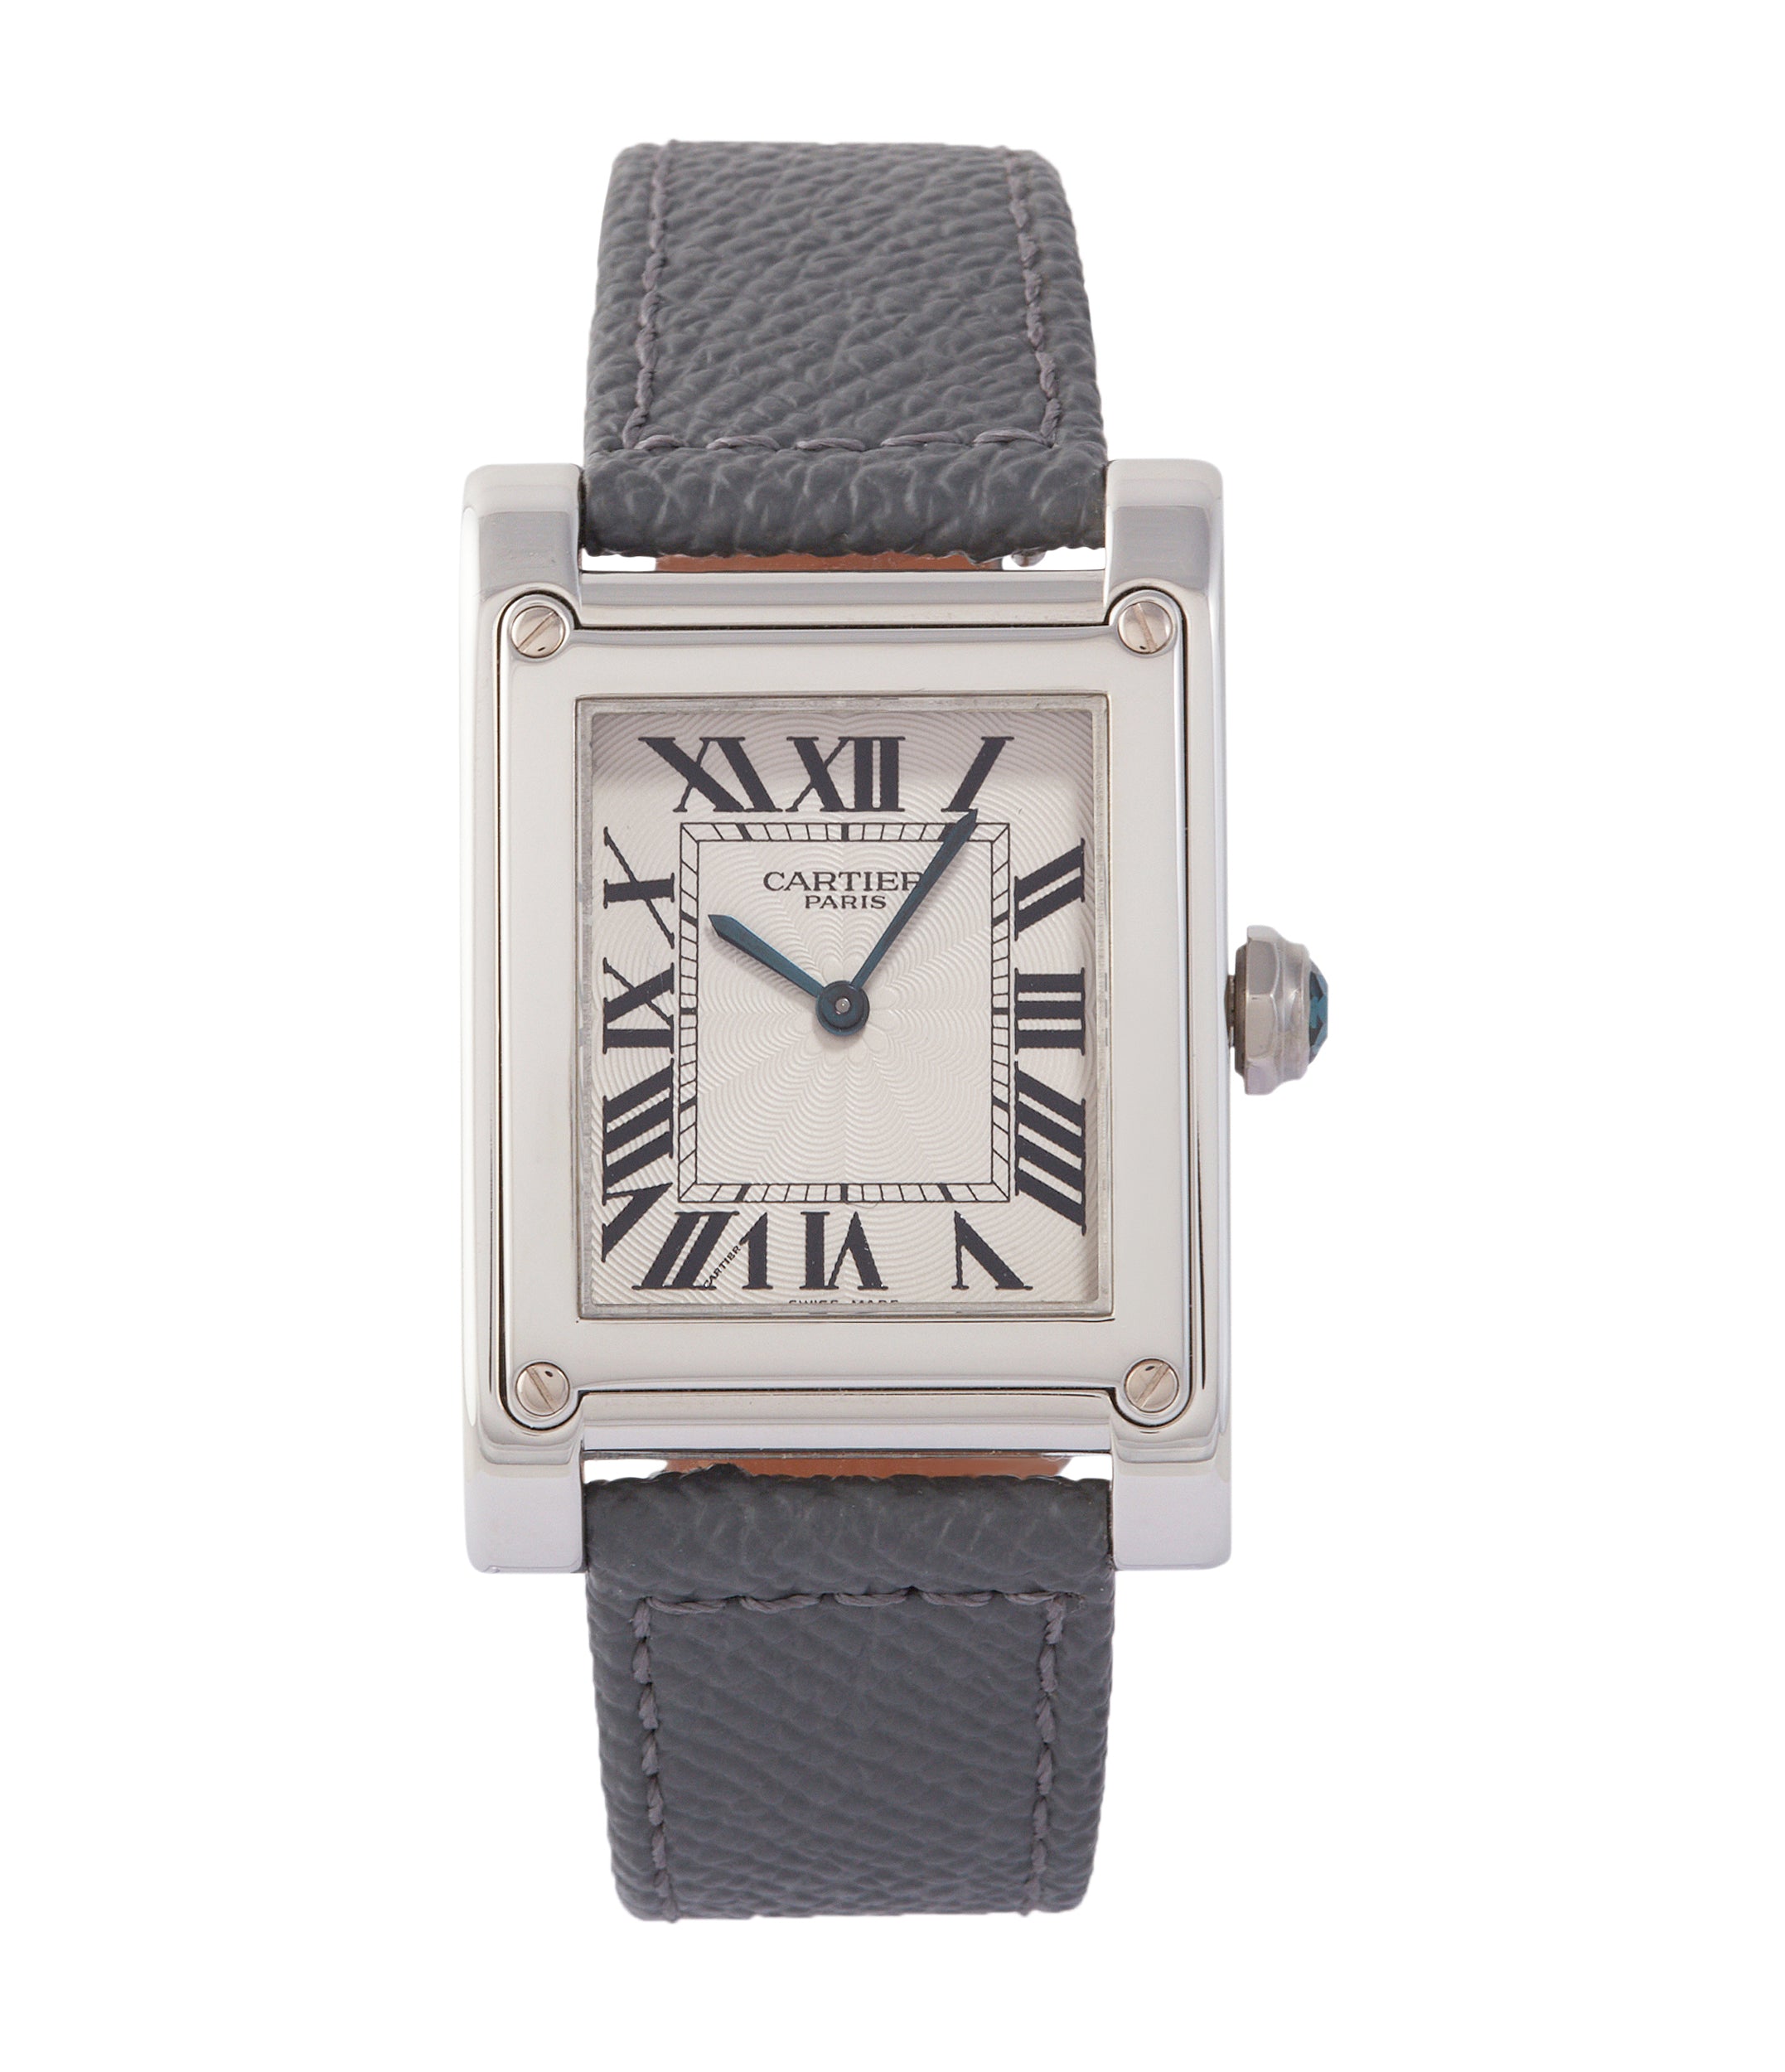 cartier tank watch stopped working